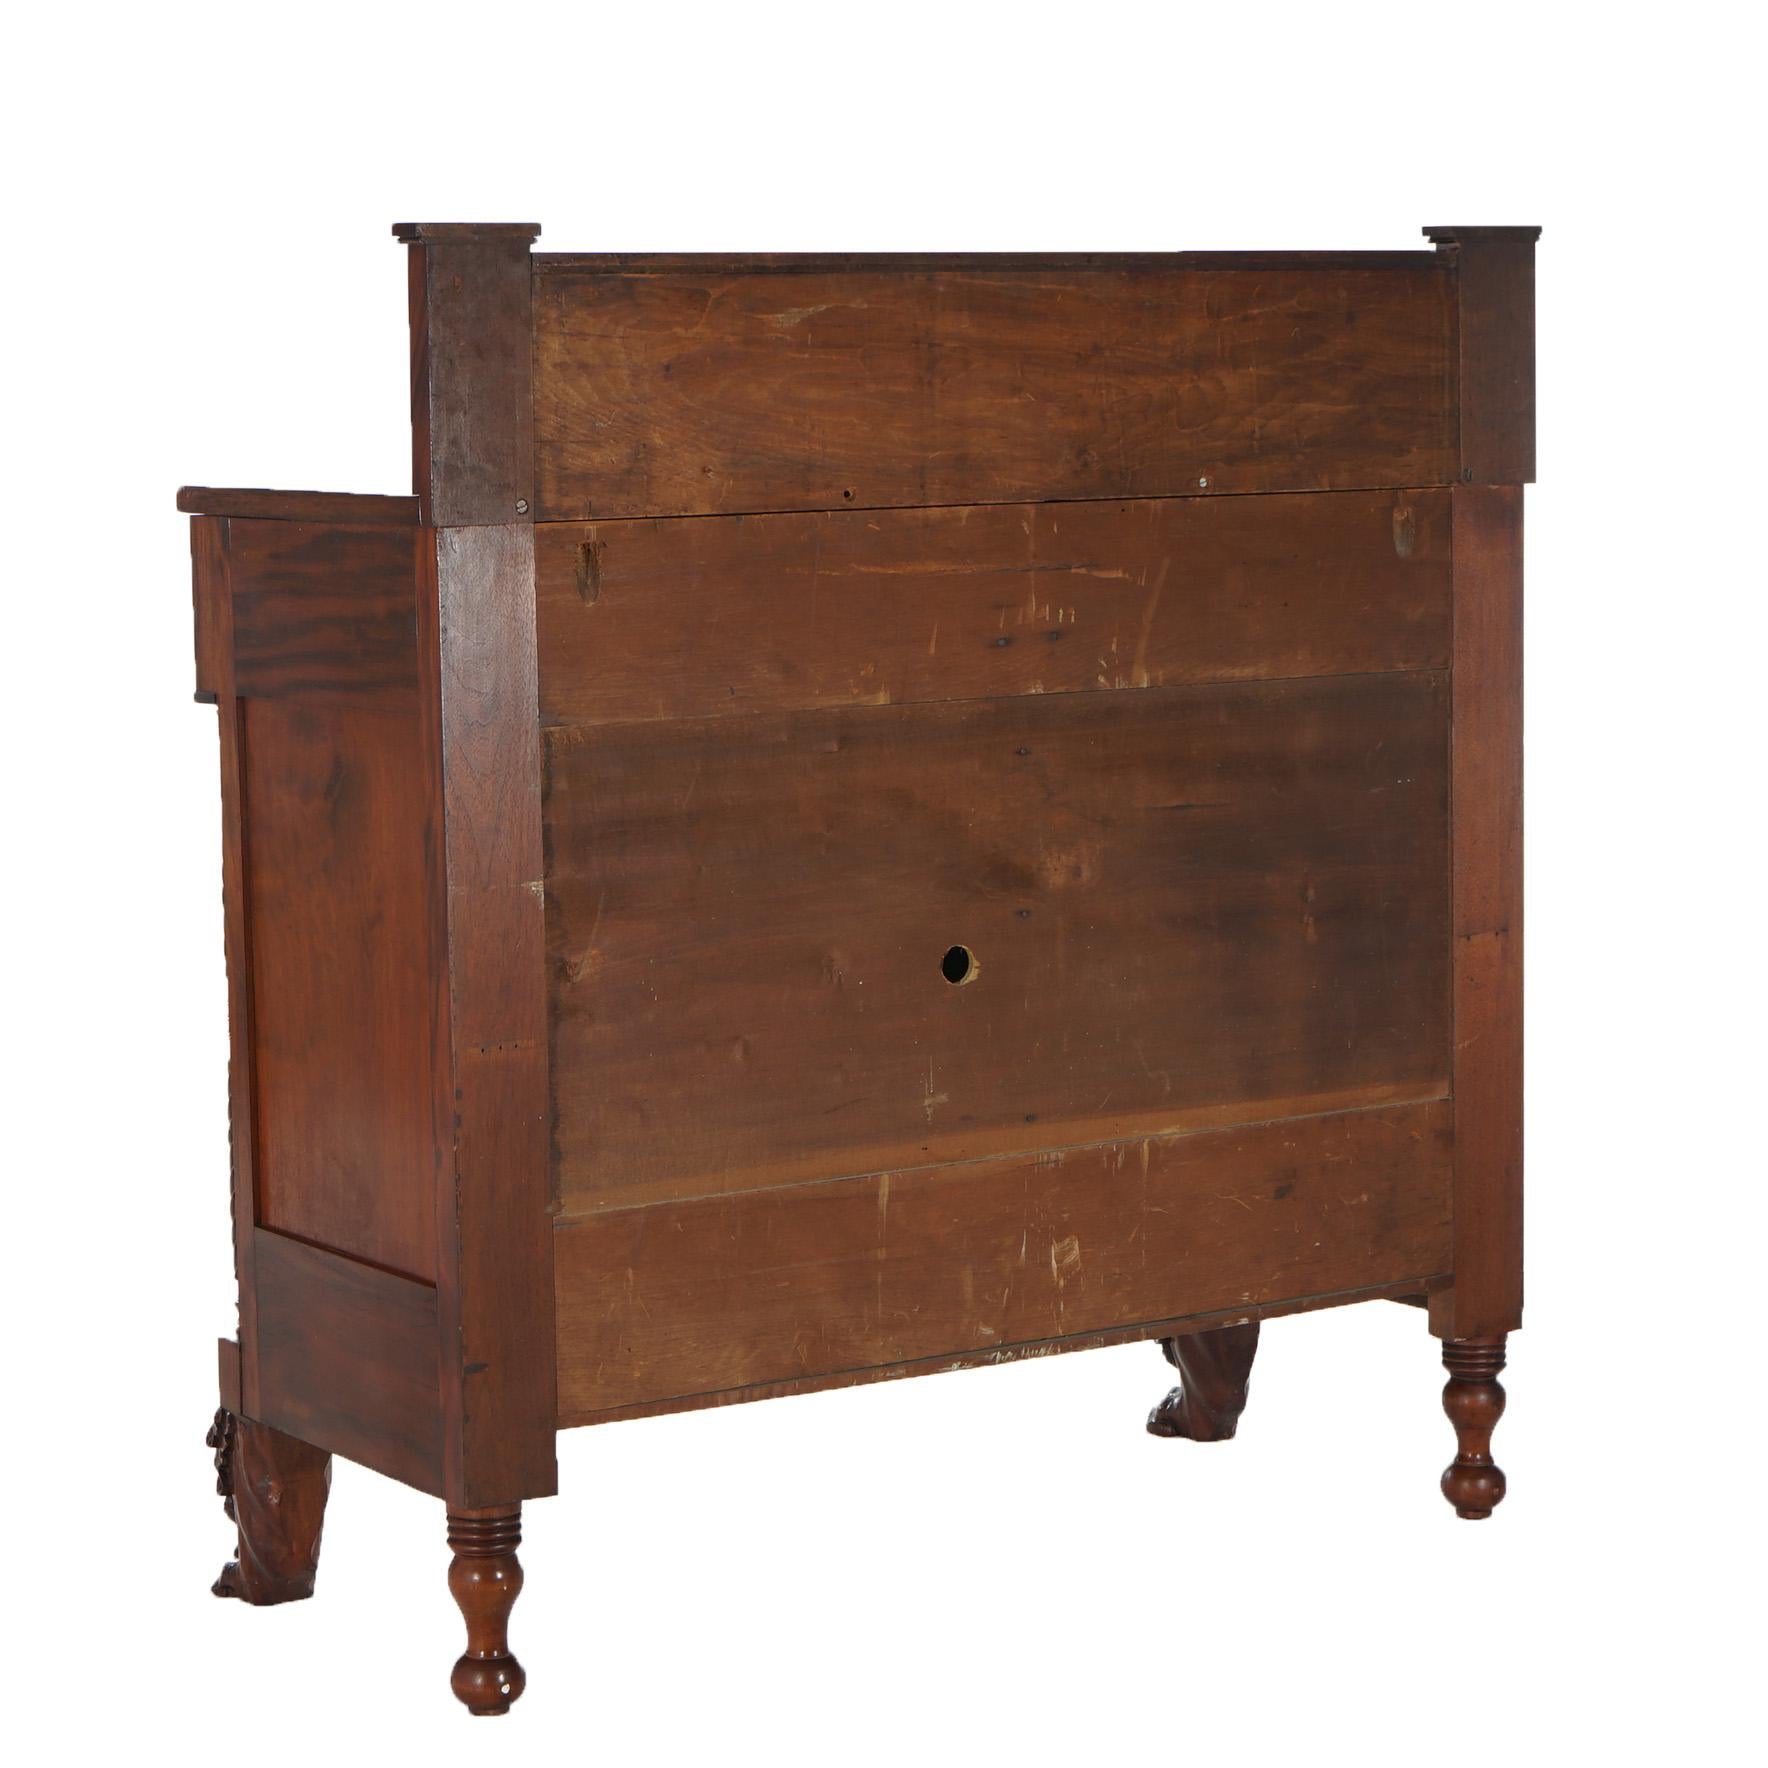 Antique American Empire Flame Mahogany Marble Top Linen Press Sideboard C1840 For Sale 9